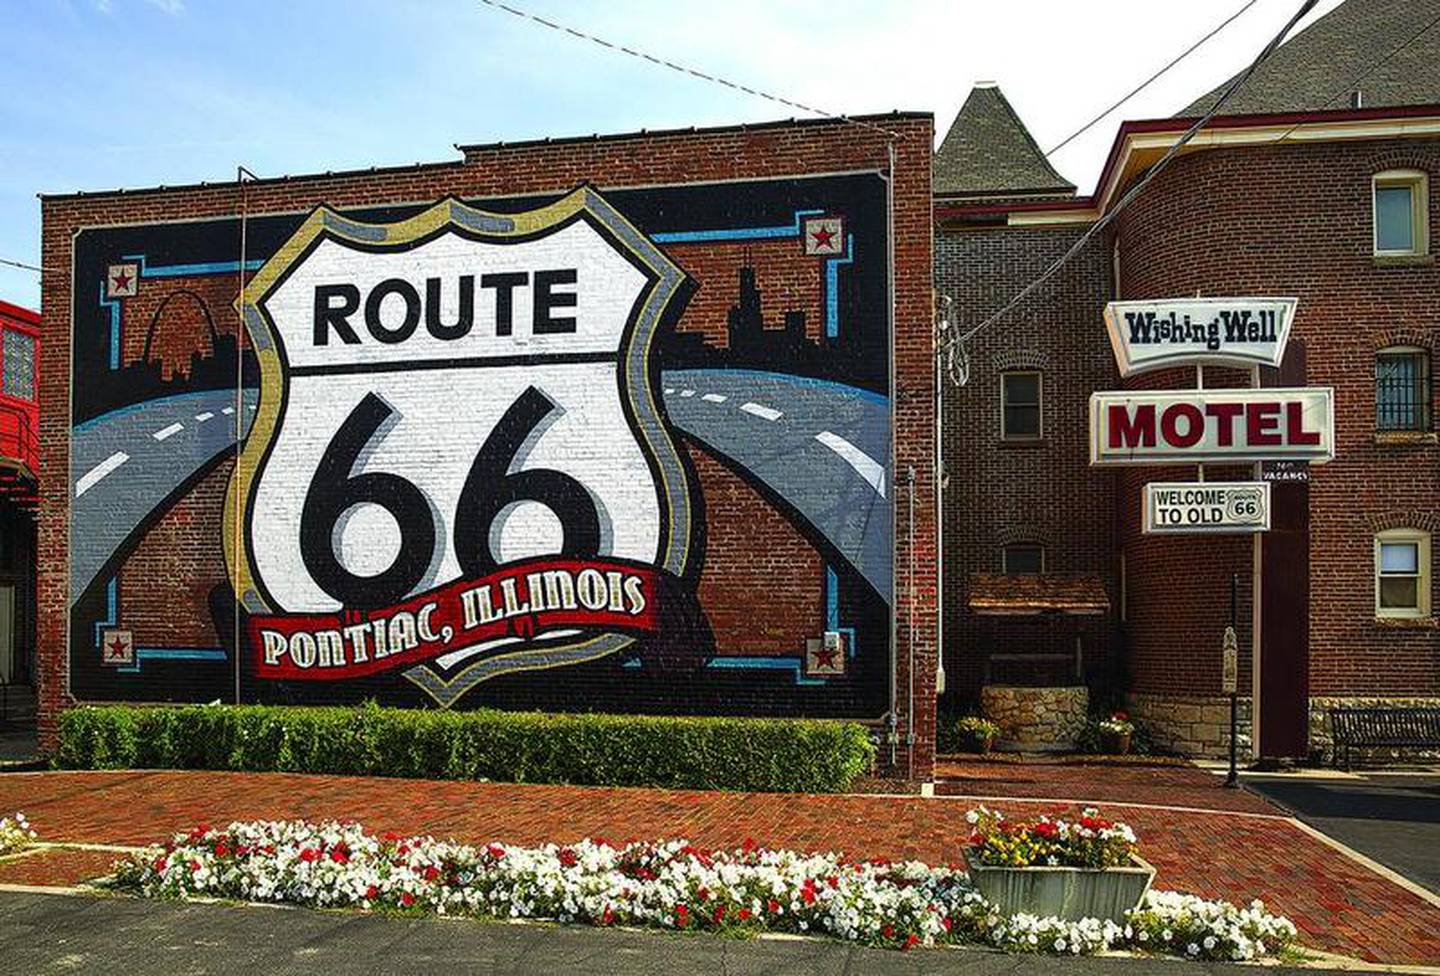 The Route 66 logo fills the wall at the rear of the Route 66 Hall of Fame & Museum in Pontiac.